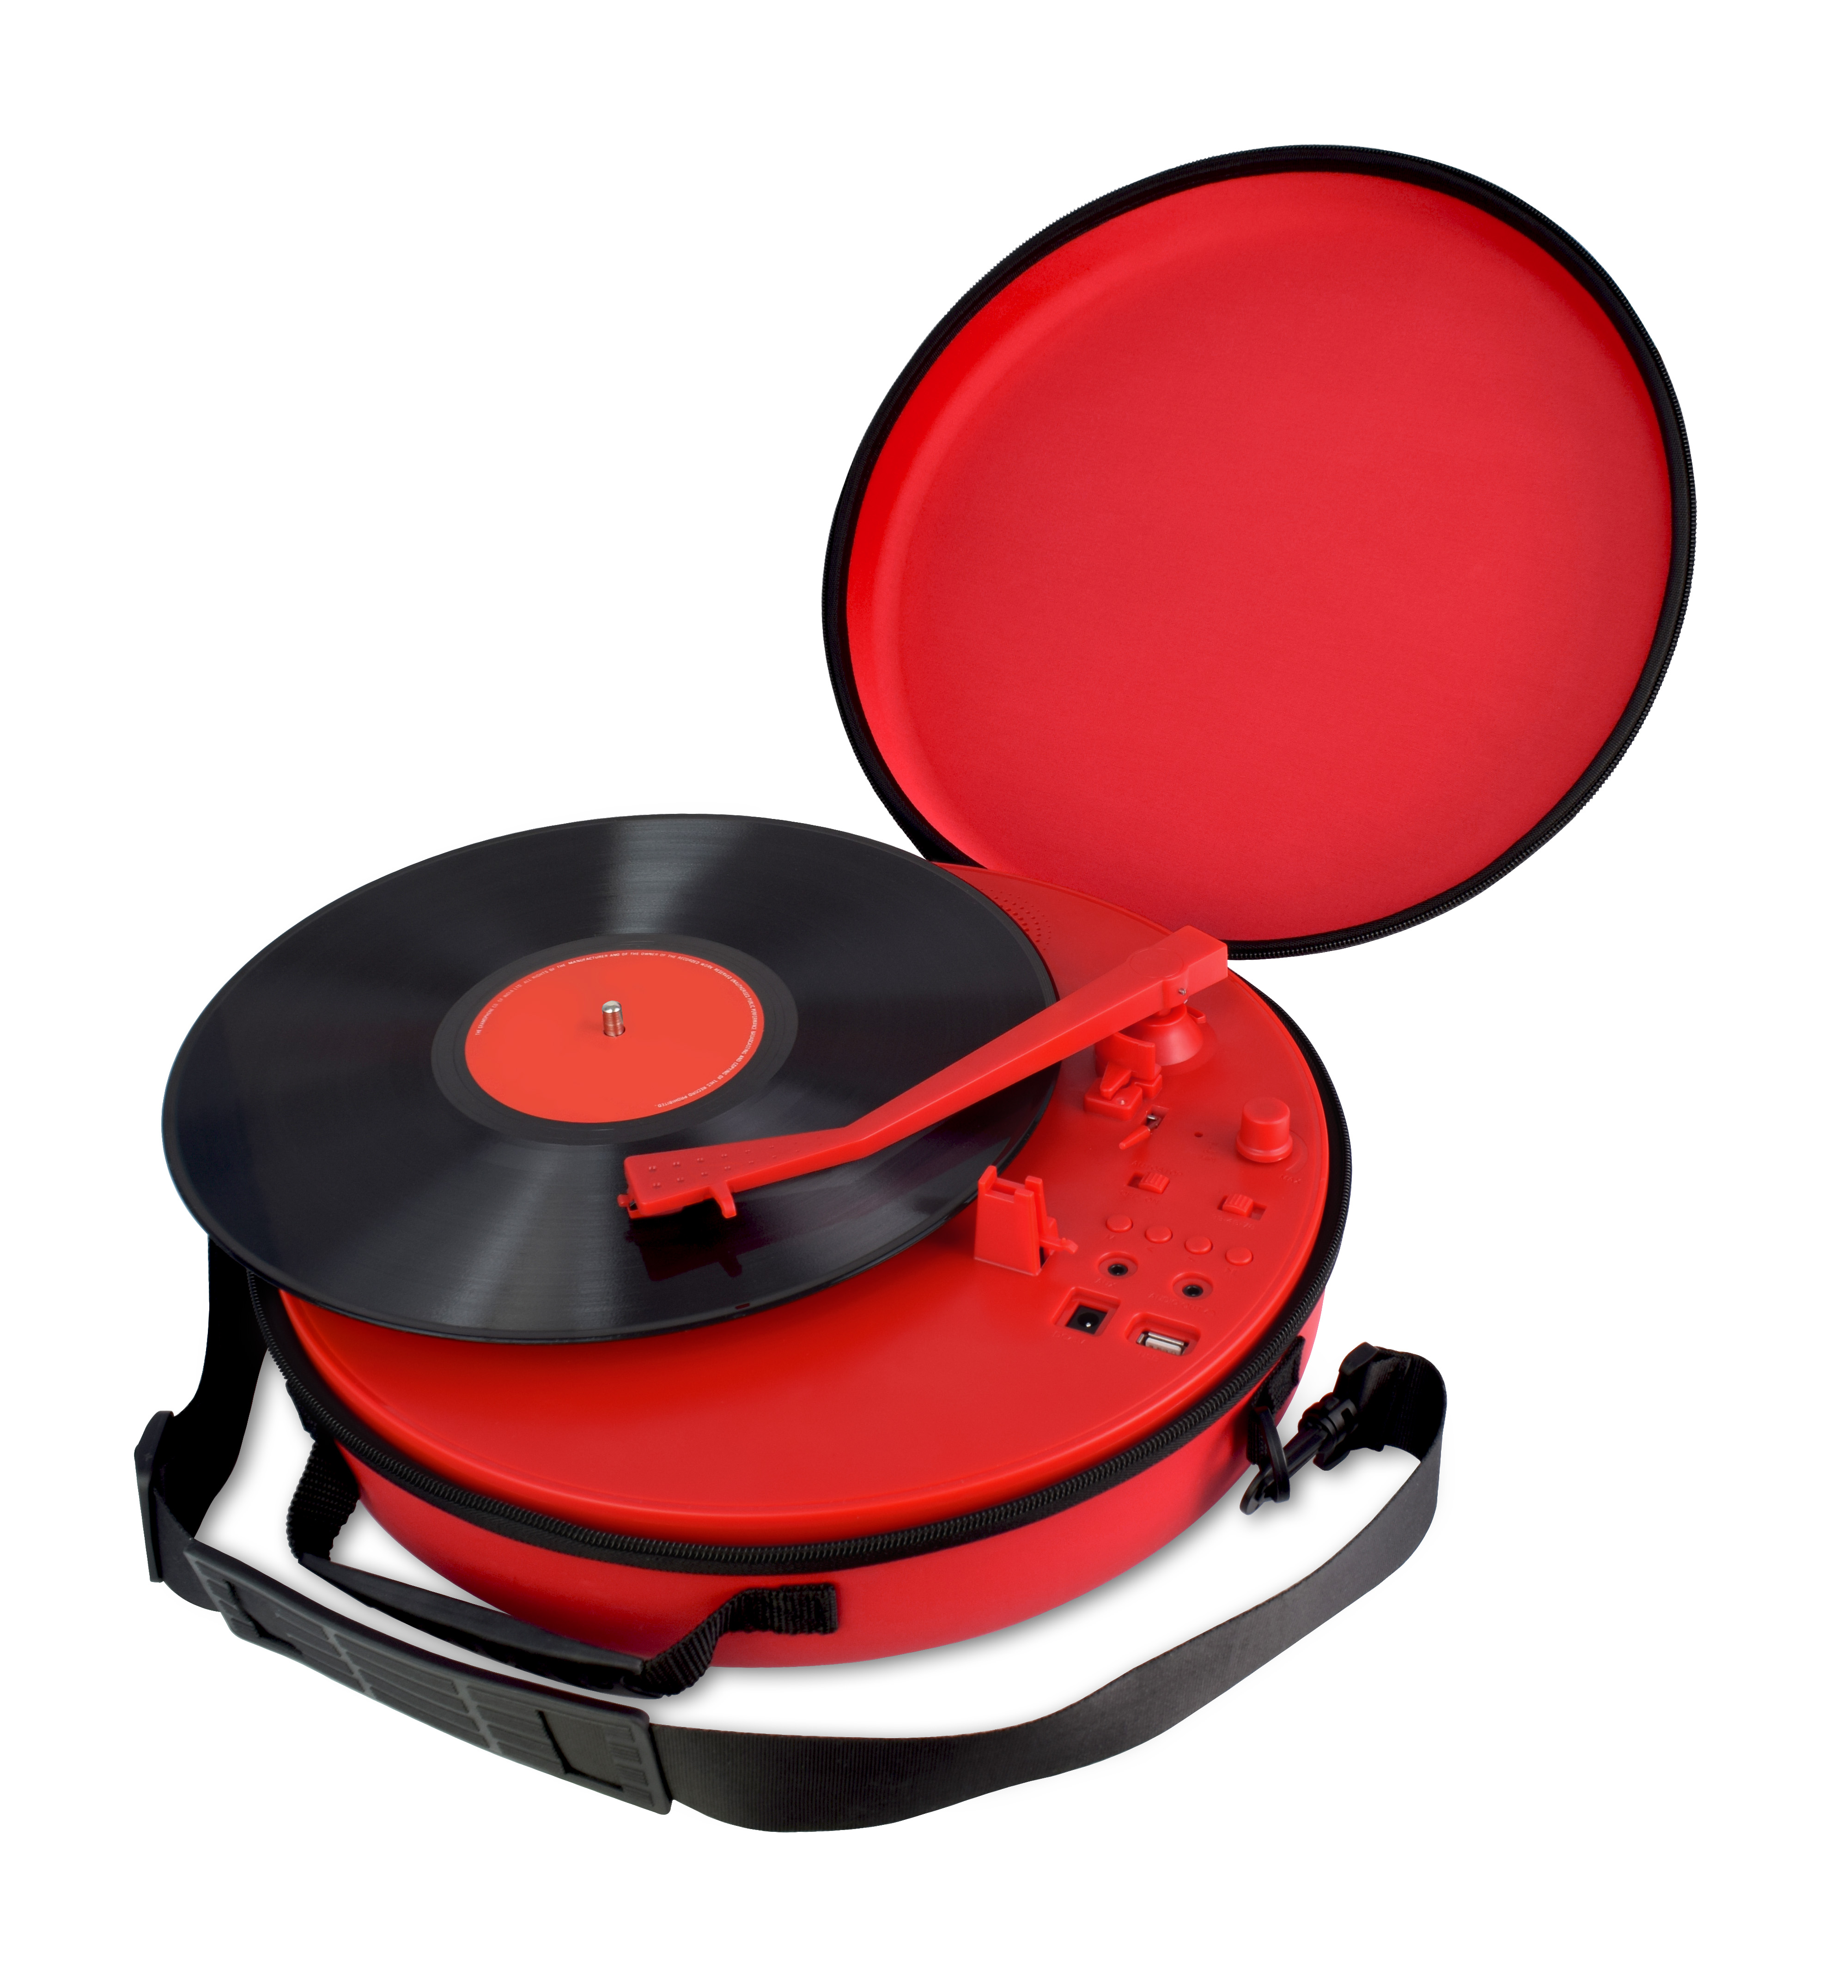 Coca Cola Retro Turntable with Wireless Speaker, 3 Different Playback Modes, 33S, 45S, 78S Playback Support, Portable Carry Case, Vintage Radio - image 2 of 10